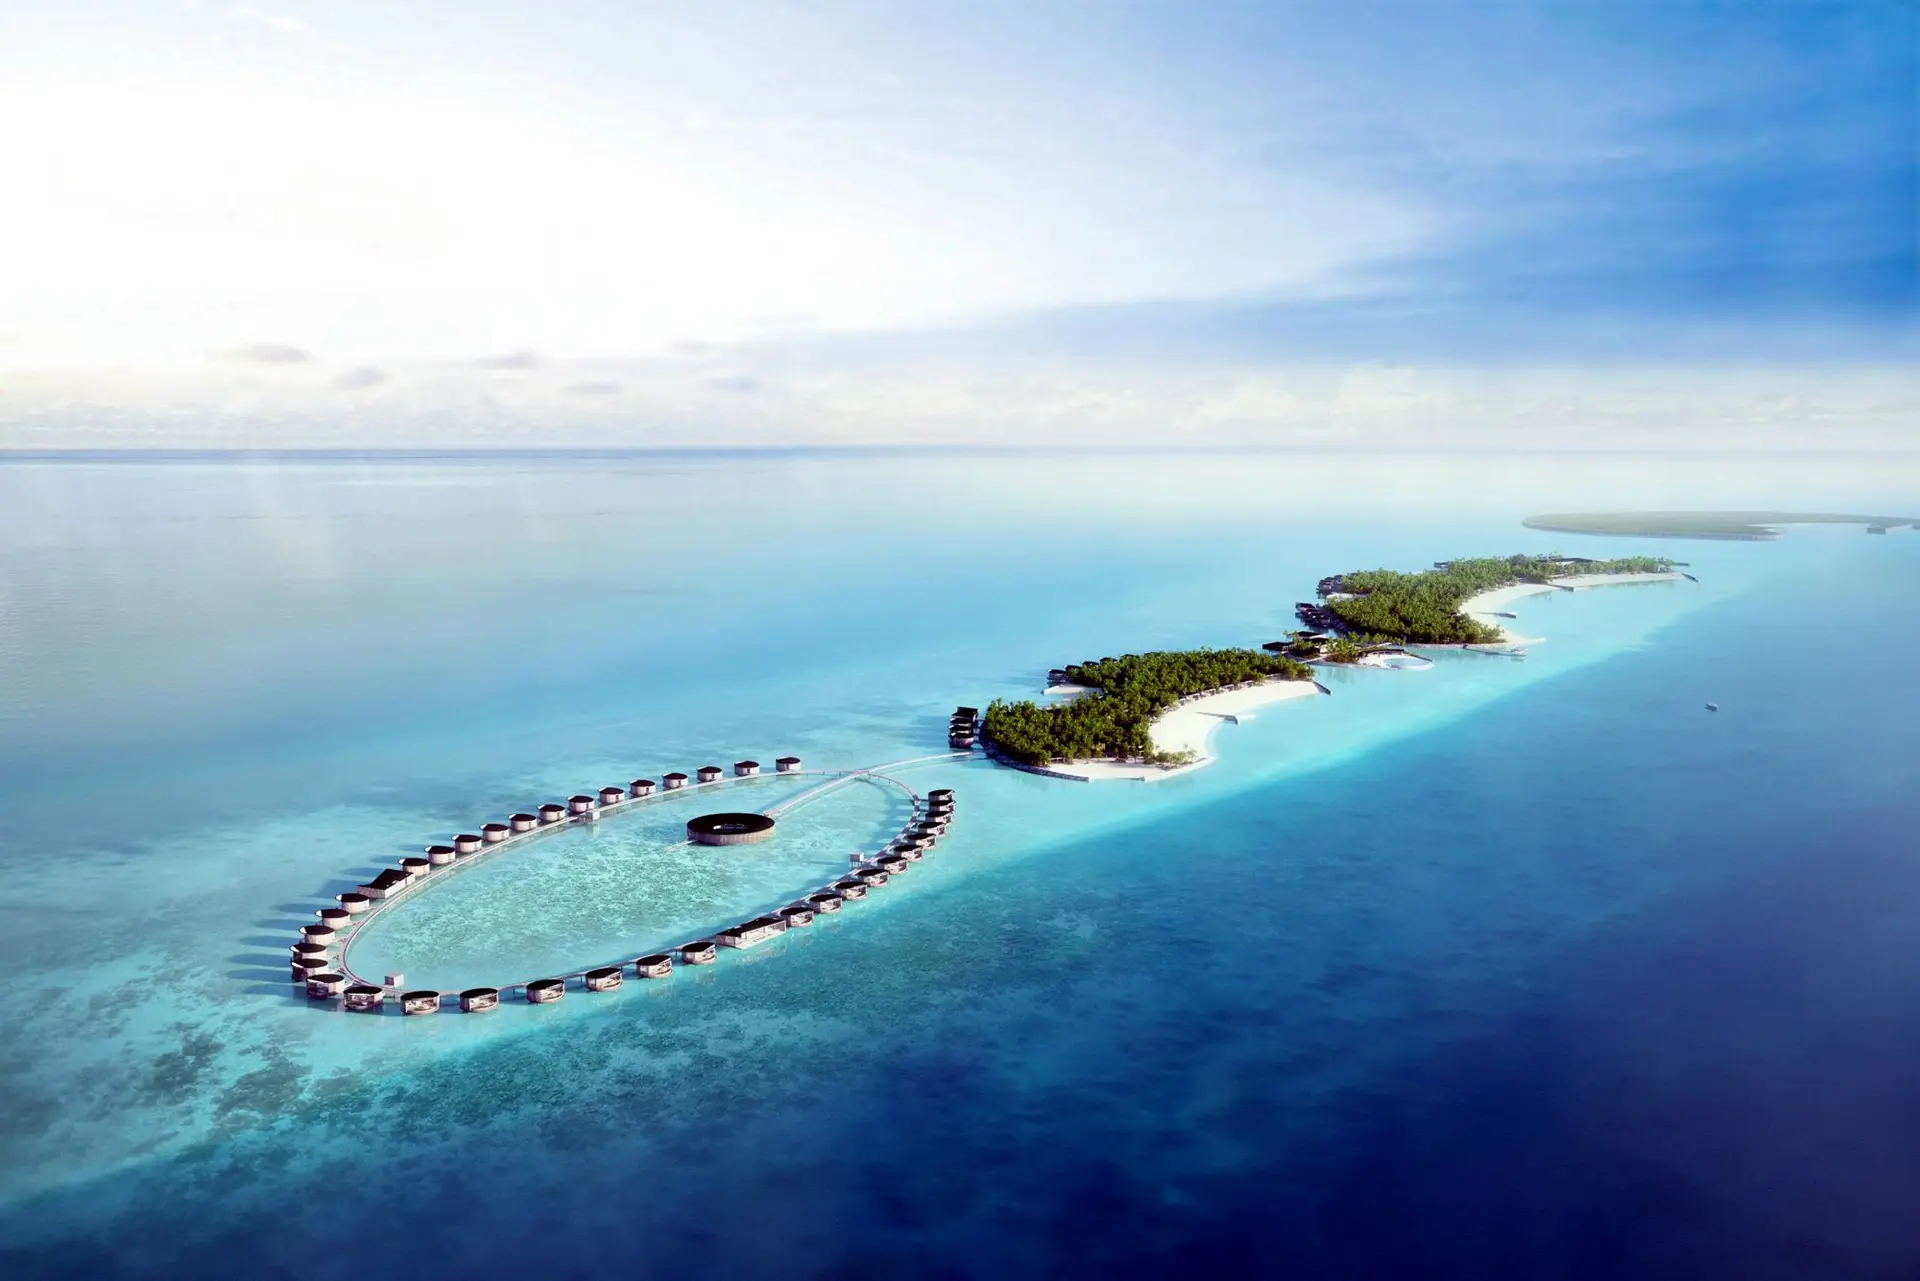 Hotels News - The Ritz-Carlton debuts in the Maldives in 2021